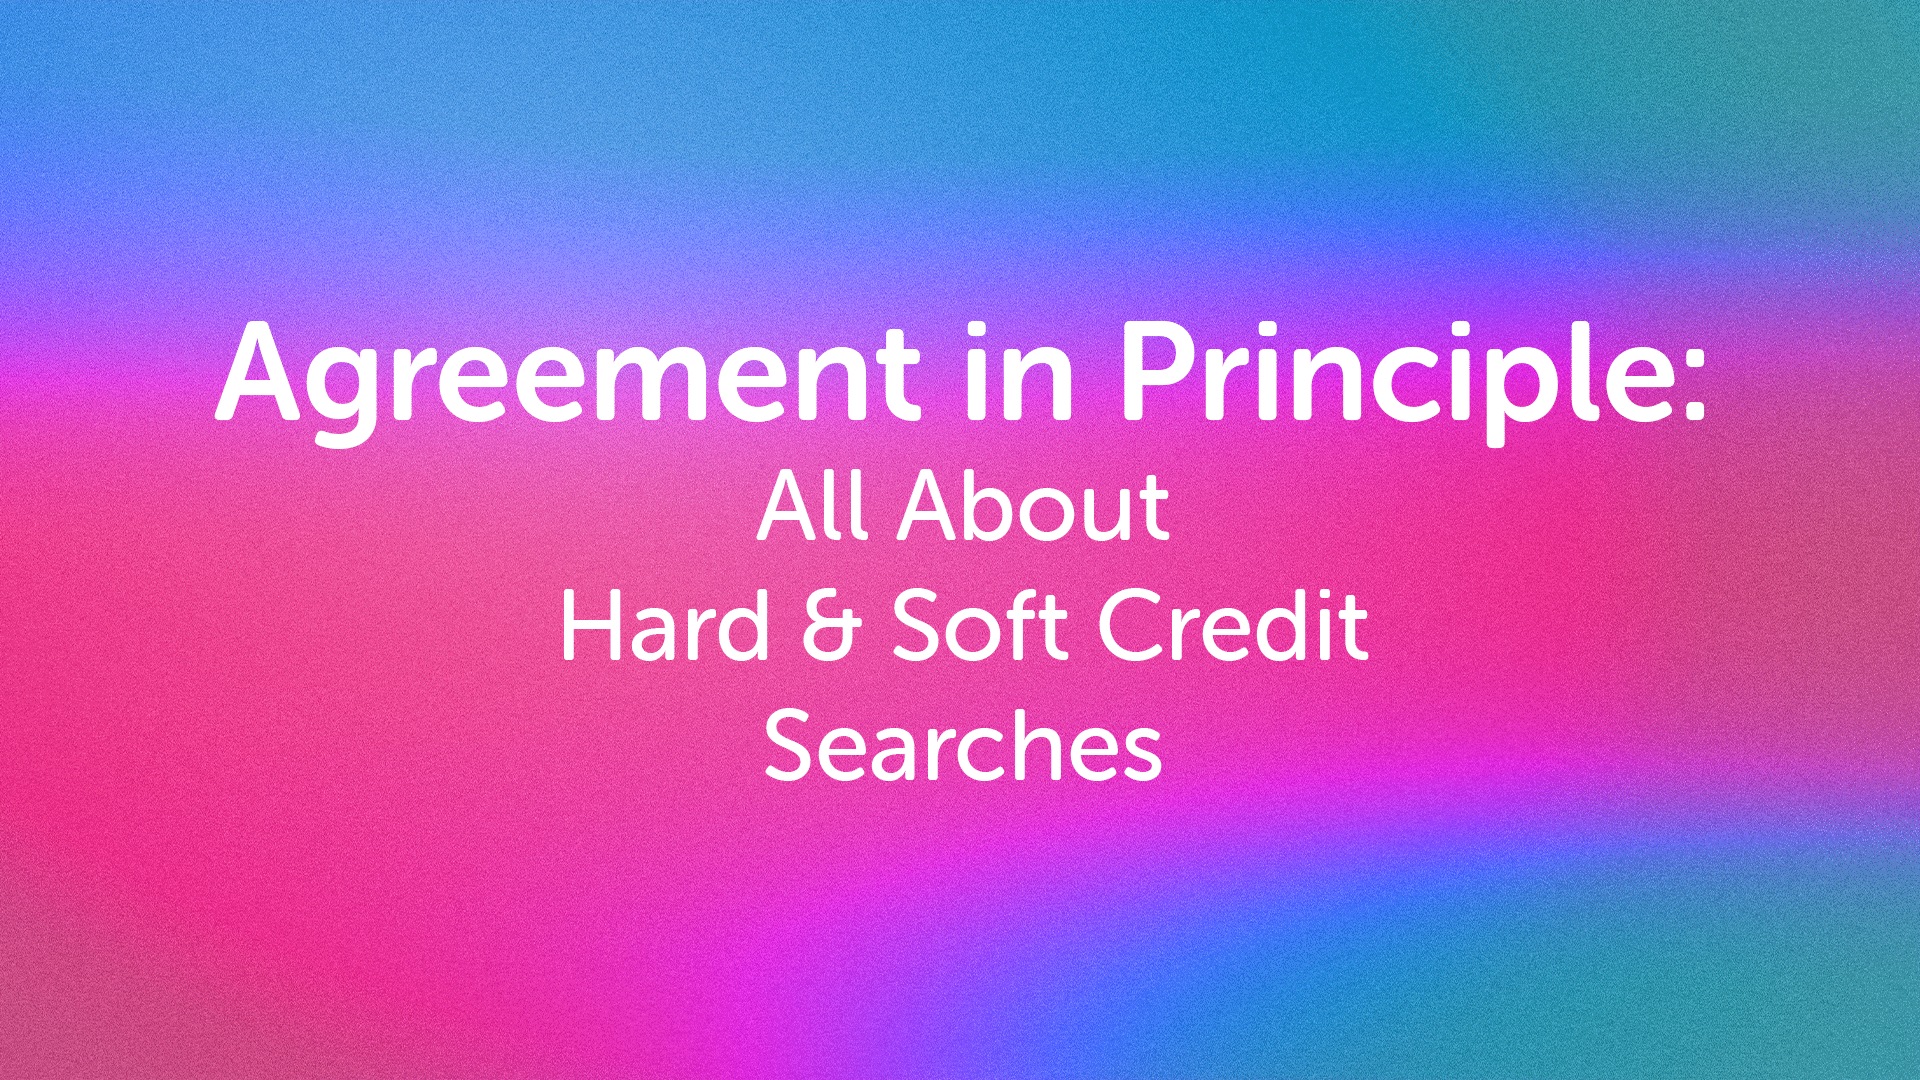 Agreement in Principle & Soft Credit Search